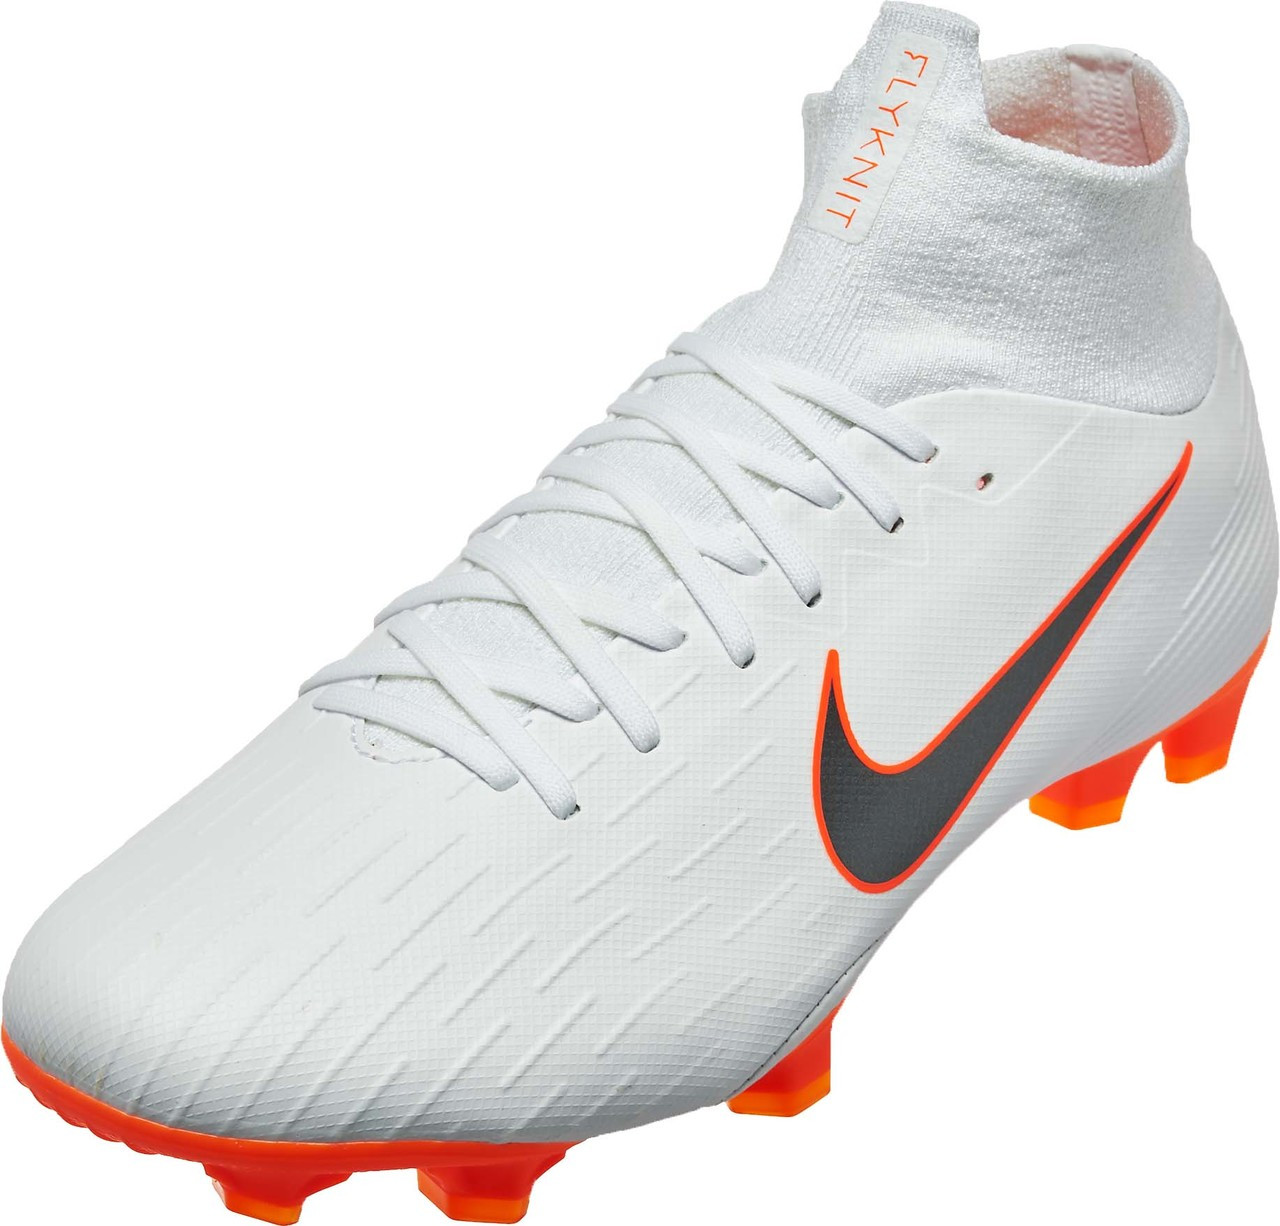 NIKE SUPERFLY 6 PRO FG WHITE/COOL GREY -